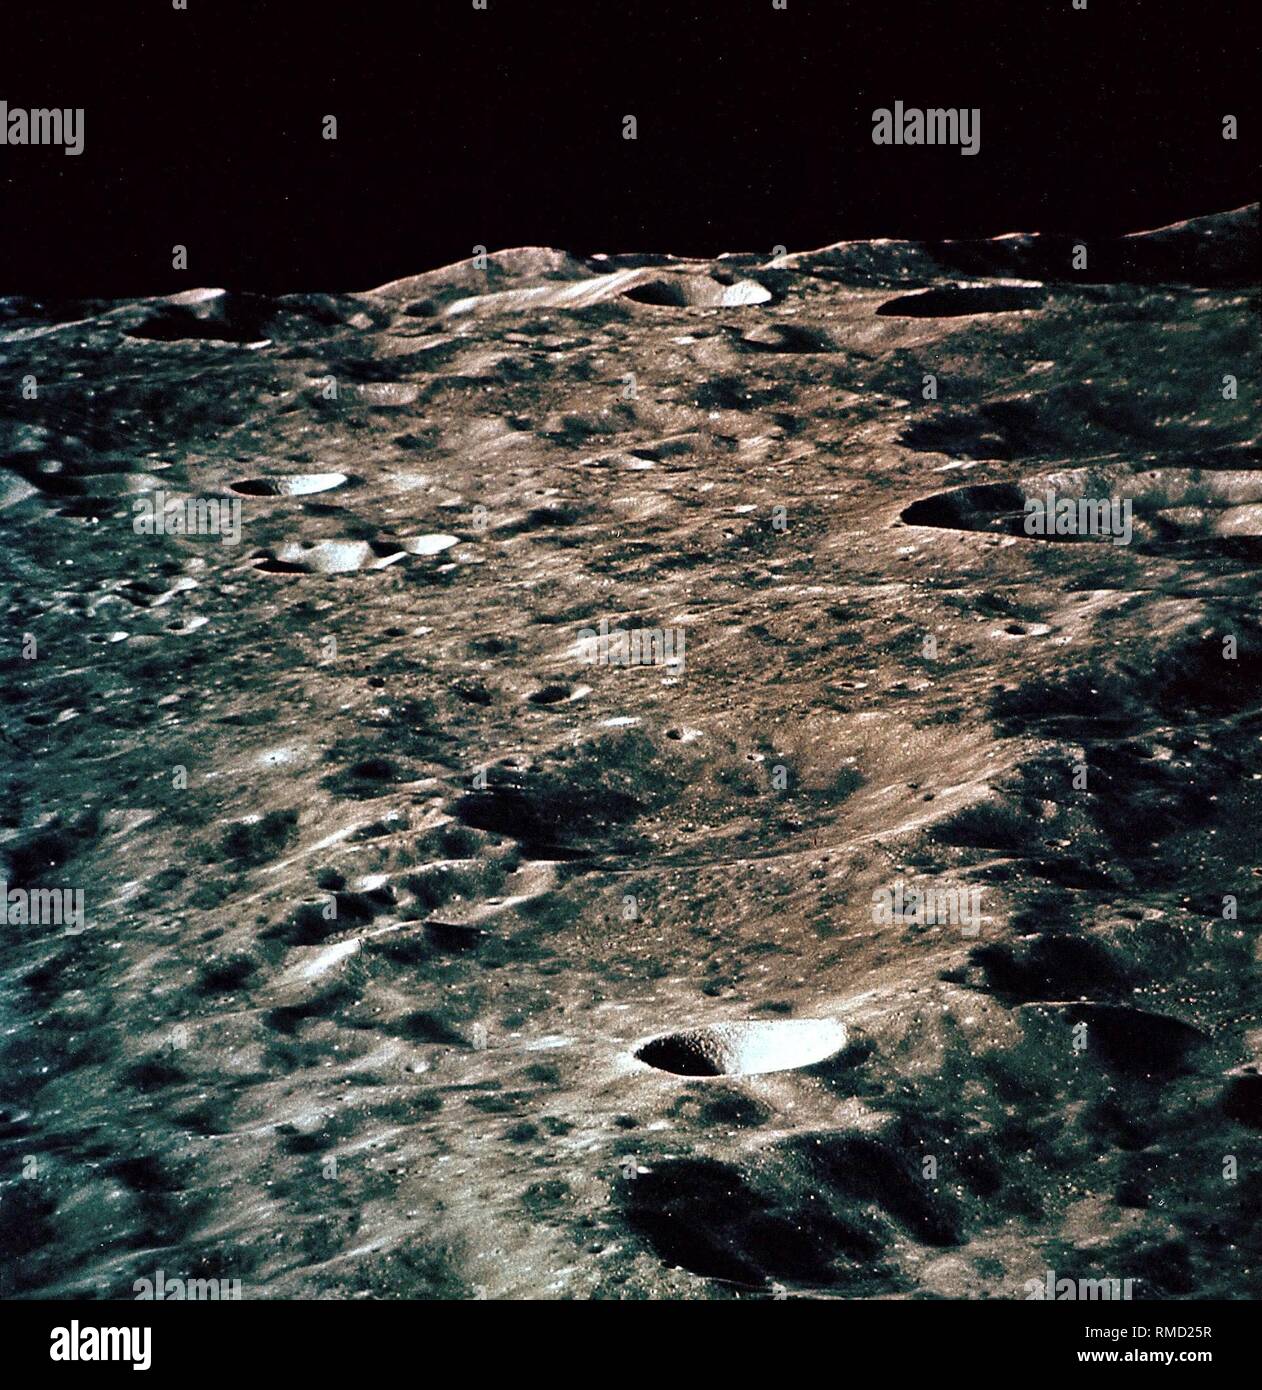 As part of the orbiting of the Moon of Apollo 10 (May 1969), this photo of the crater landscape on the far side of the Moon was taken by the lunar module 'Snoopy'. Stock Photo